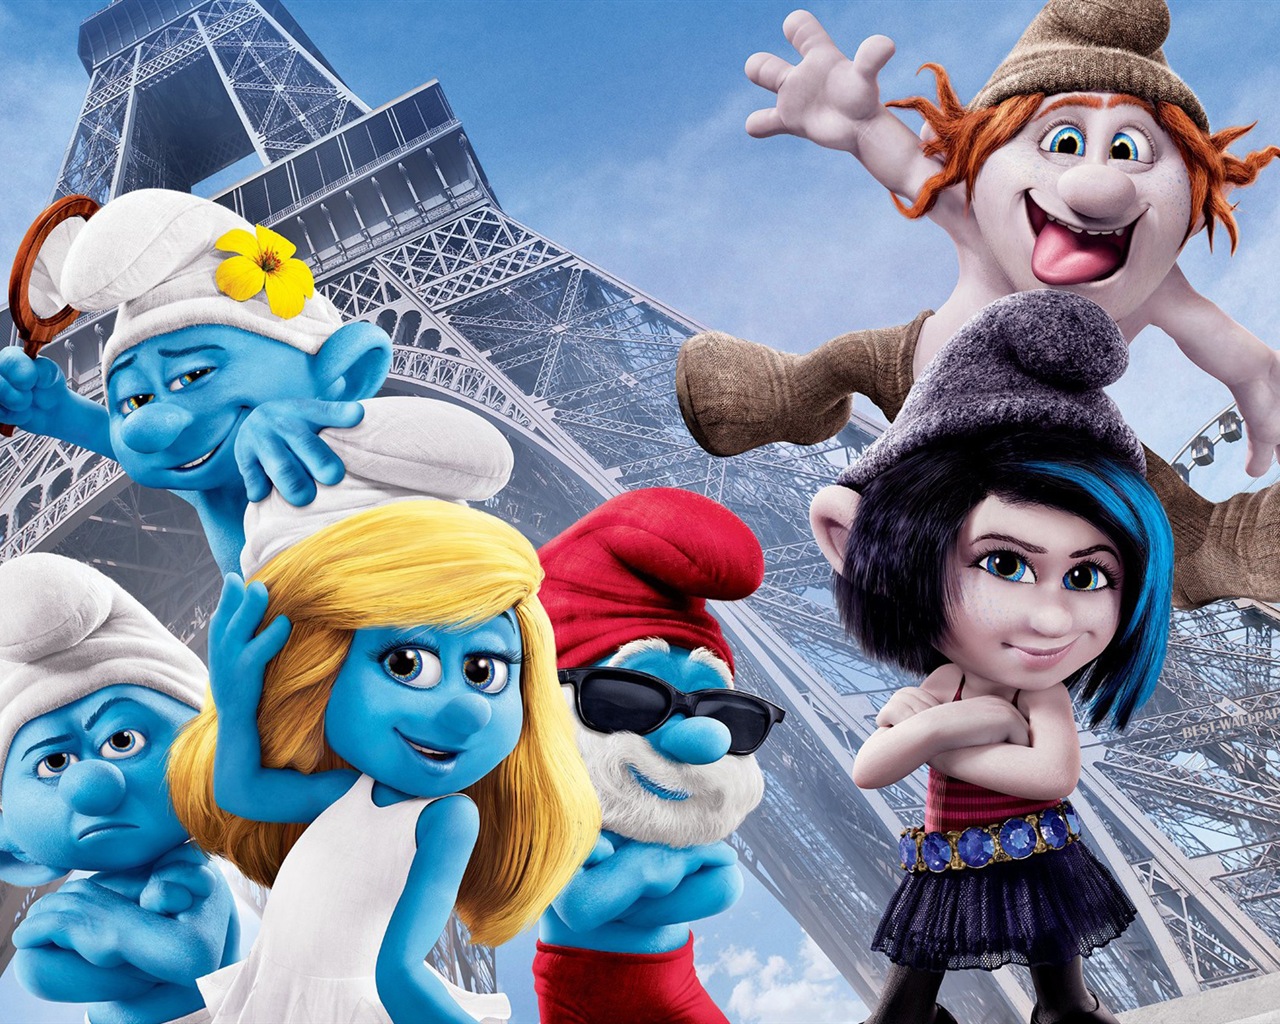 The Smurfs 2 HD movie wallpapers #1 - 1280x1024